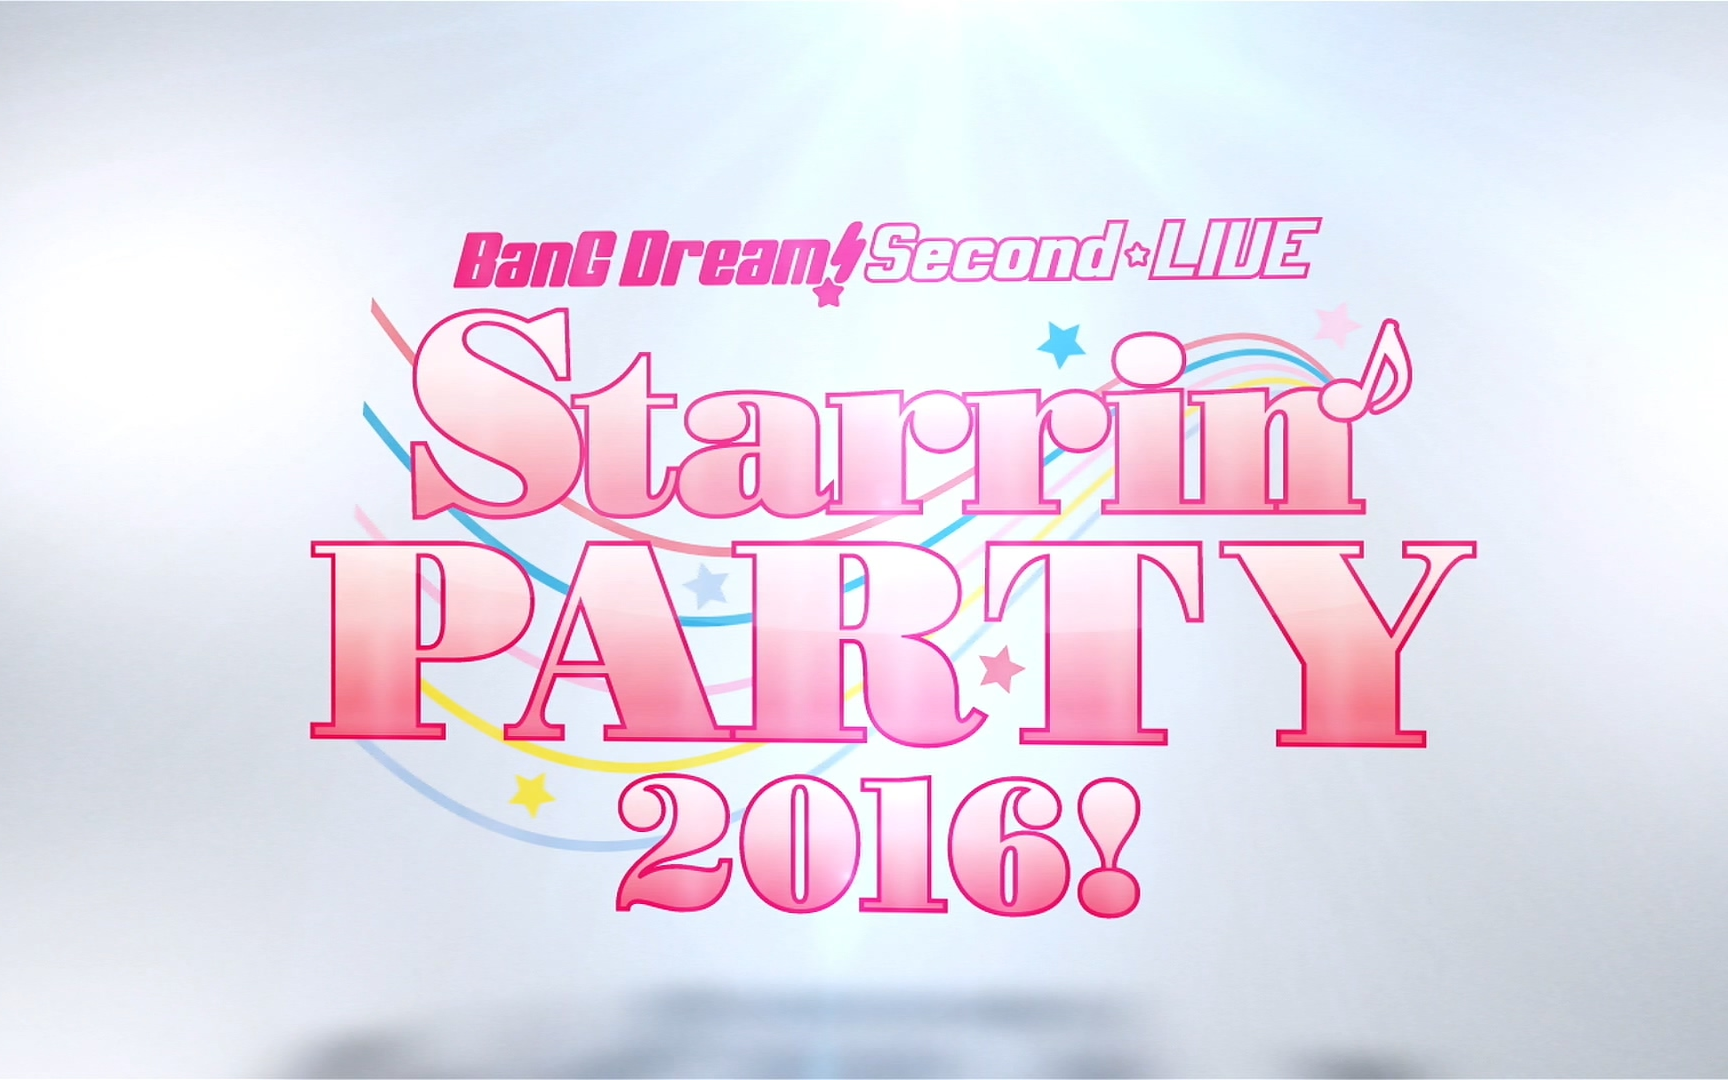 Bang Dream Second Live Starrin Party 16 60fps Ver 哔哩哔哩 つロ干杯 Bilibili